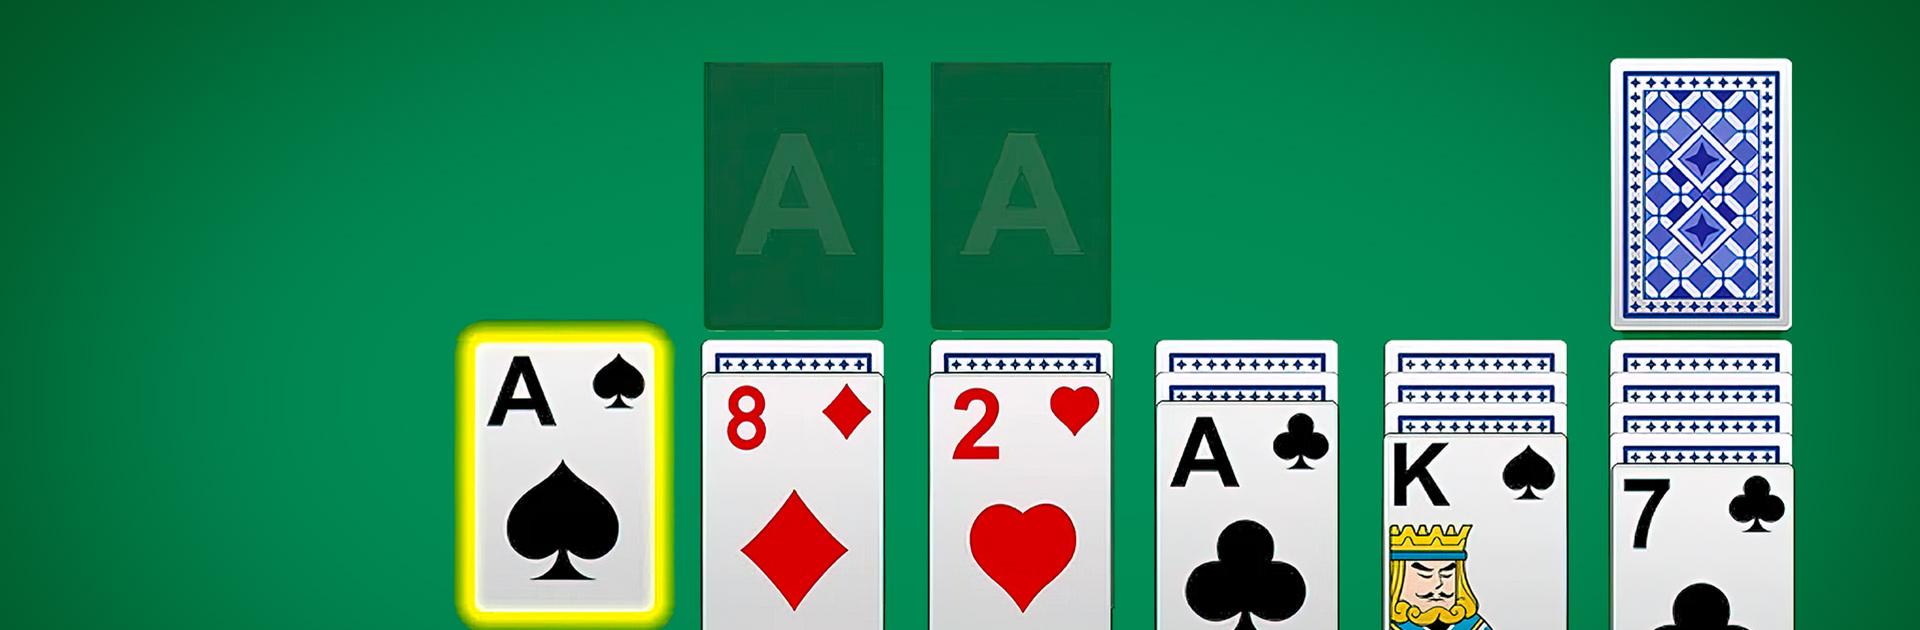 Freecell Solitaire - Green Felt  Solitaire, Solitaire games, Games to play